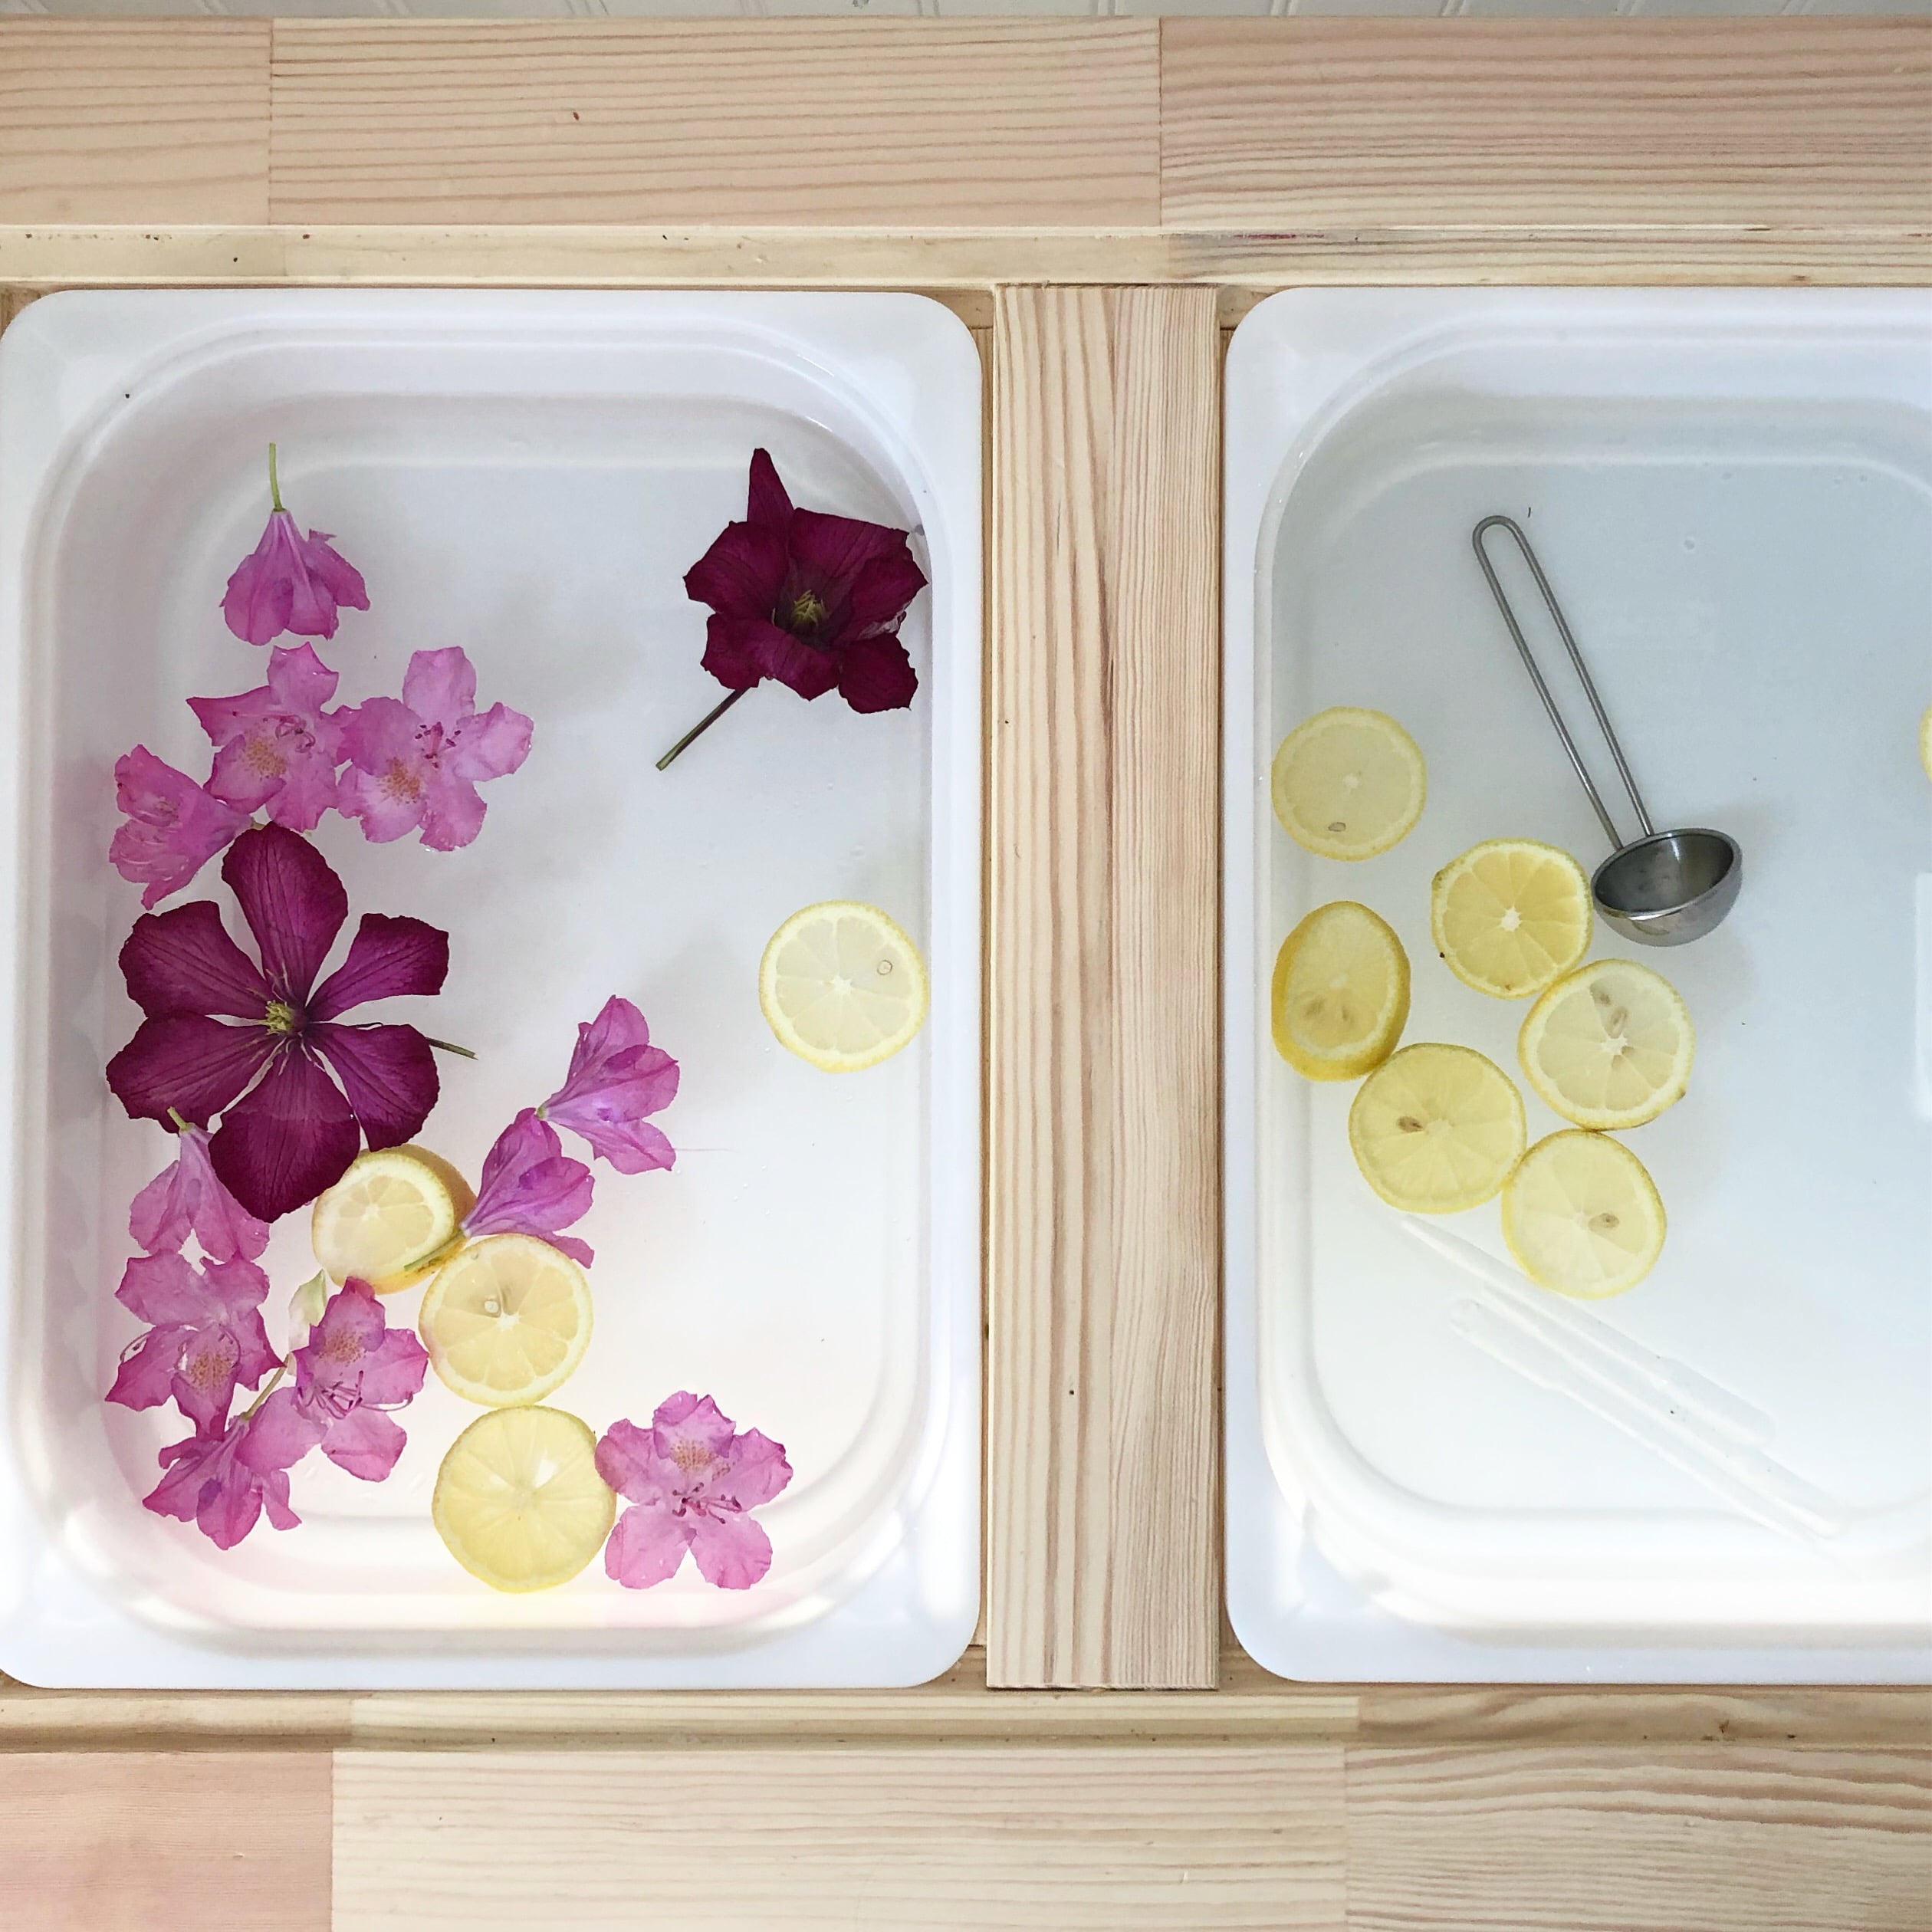 Water play table with citrus and flowers